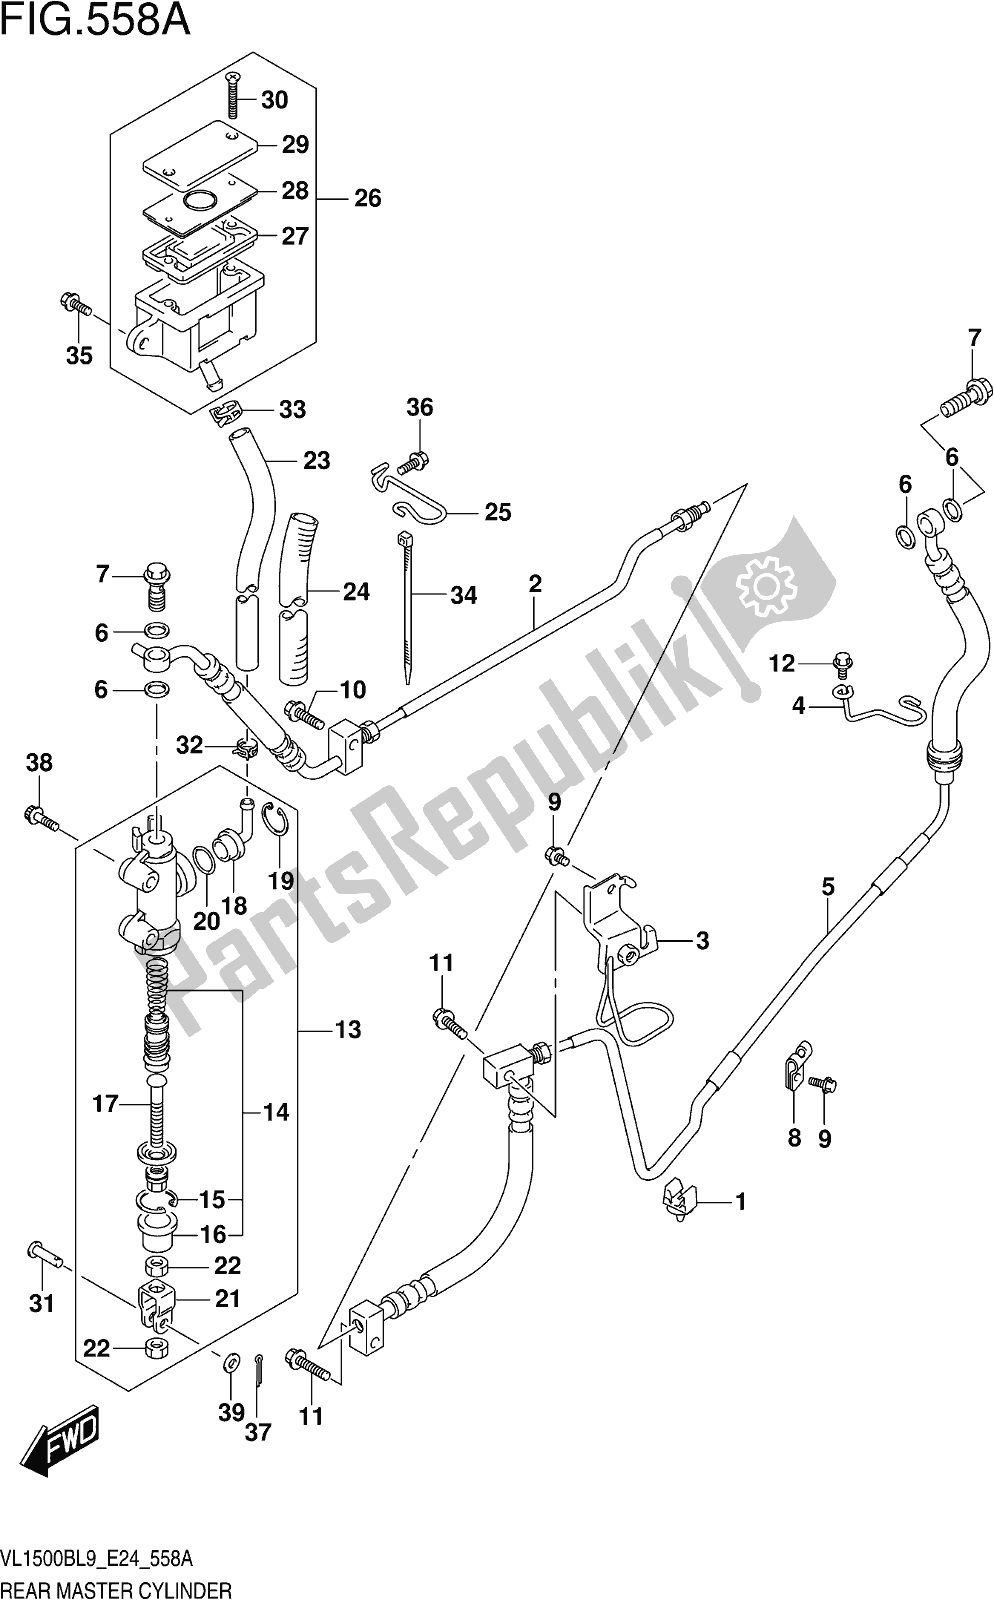 All parts for the Fig. 558a Rear Master Cylinder of the Suzuki VL 1500B 2019